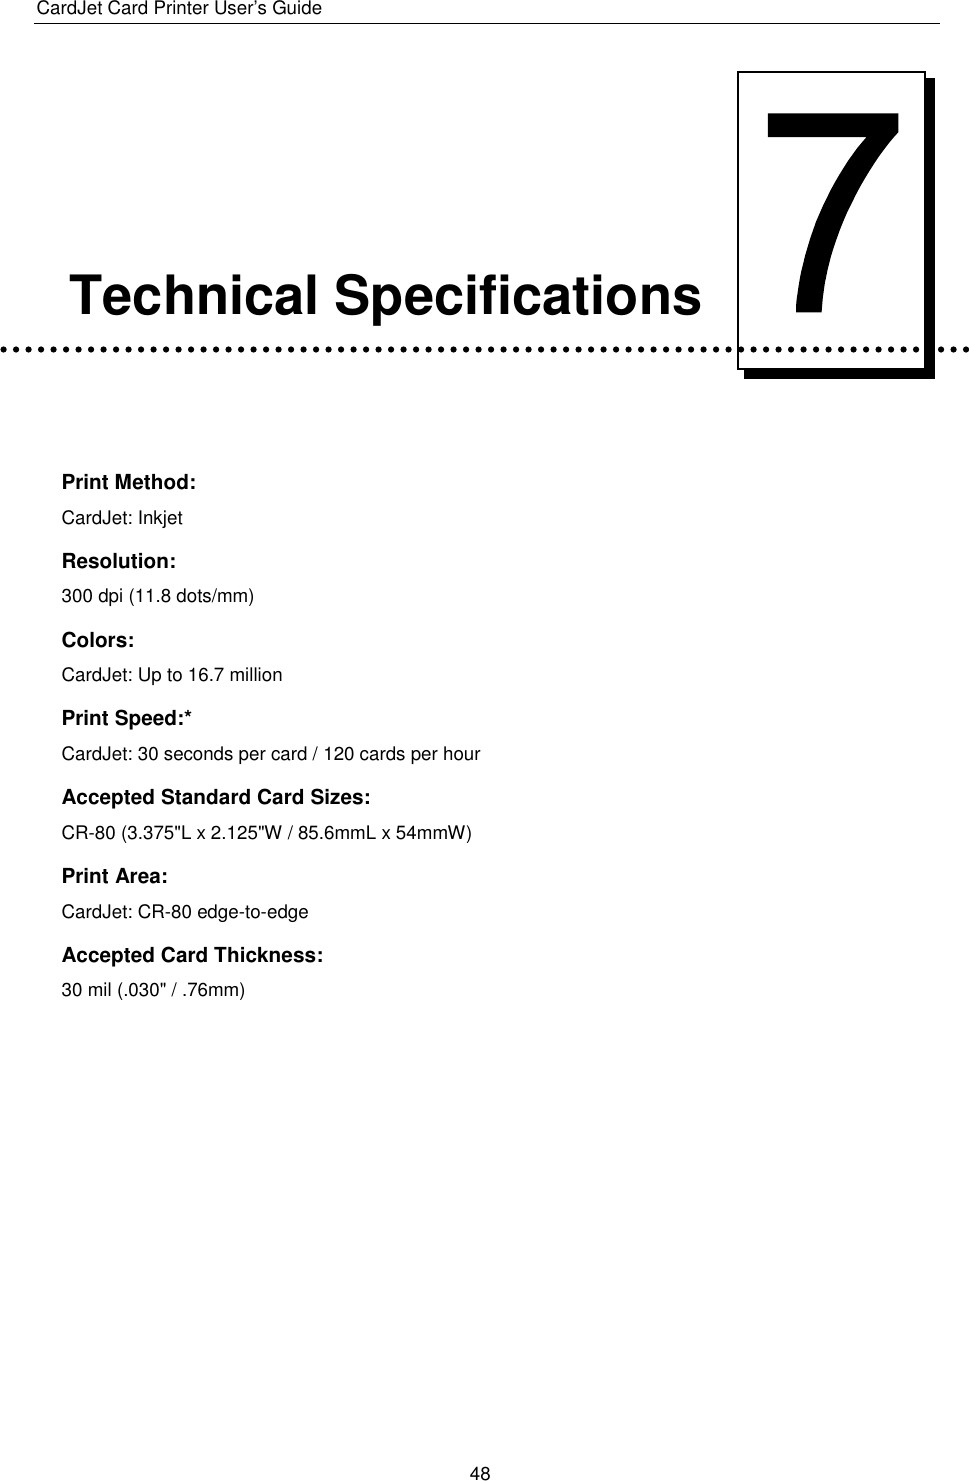 CardJet Card Printer User’s Guide  48      Technical Specifications   Print Method: CardJet: Inkjet Resolution: 300 dpi (11.8 dots/mm) Colors: CardJet: Up to 16.7 million Print Speed:* CardJet: 30 seconds per card / 120 cards per hour  Accepted Standard Card Sizes: CR-80 (3.375&quot;L x 2.125&quot;W / 85.6mmL x 54mmW) Print Area: CardJet: CR-80 edge-to-edge Accepted Card Thickness: 30 mil (.030&quot; / .76mm) 